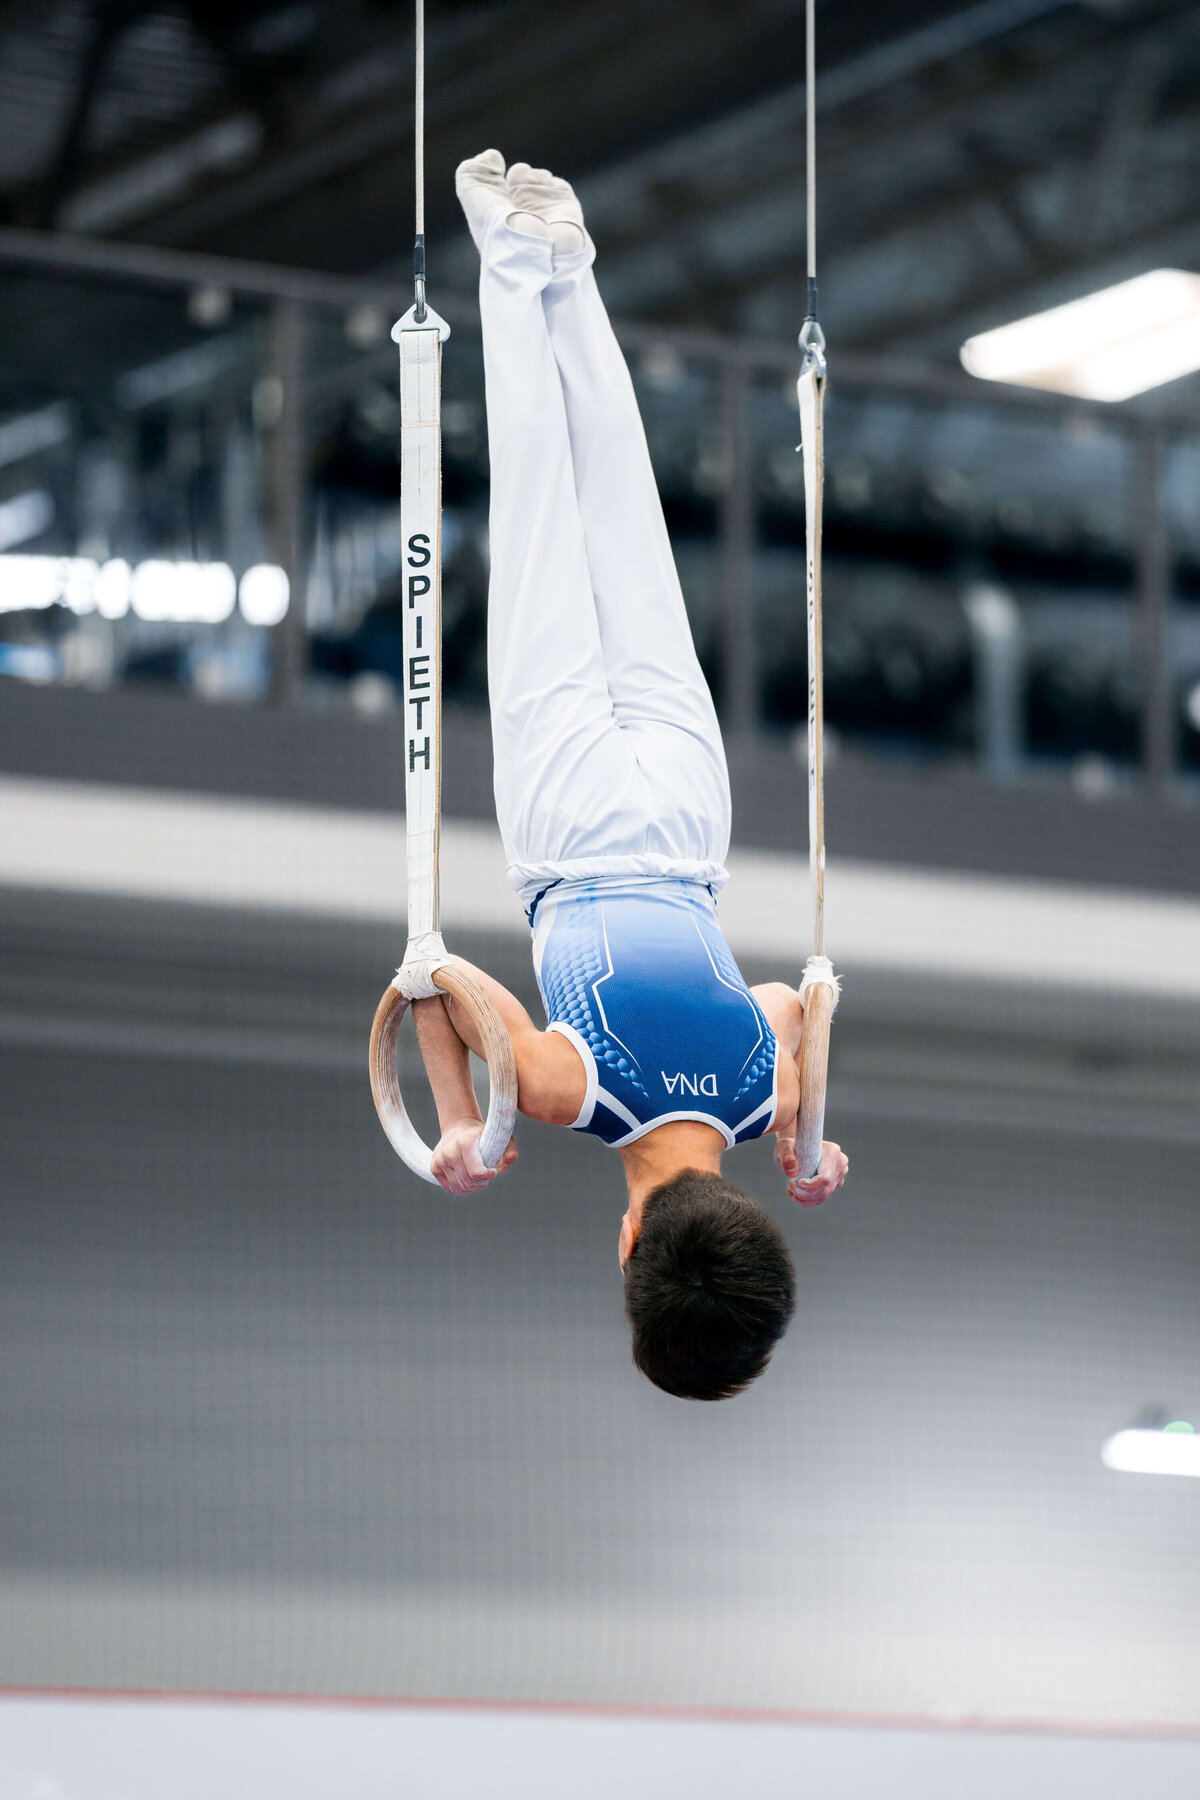 Photo by Luke O'Geil taken at the 2023 inaugural Grizzly Classic men's artistic gymnastics competitionA9_01441